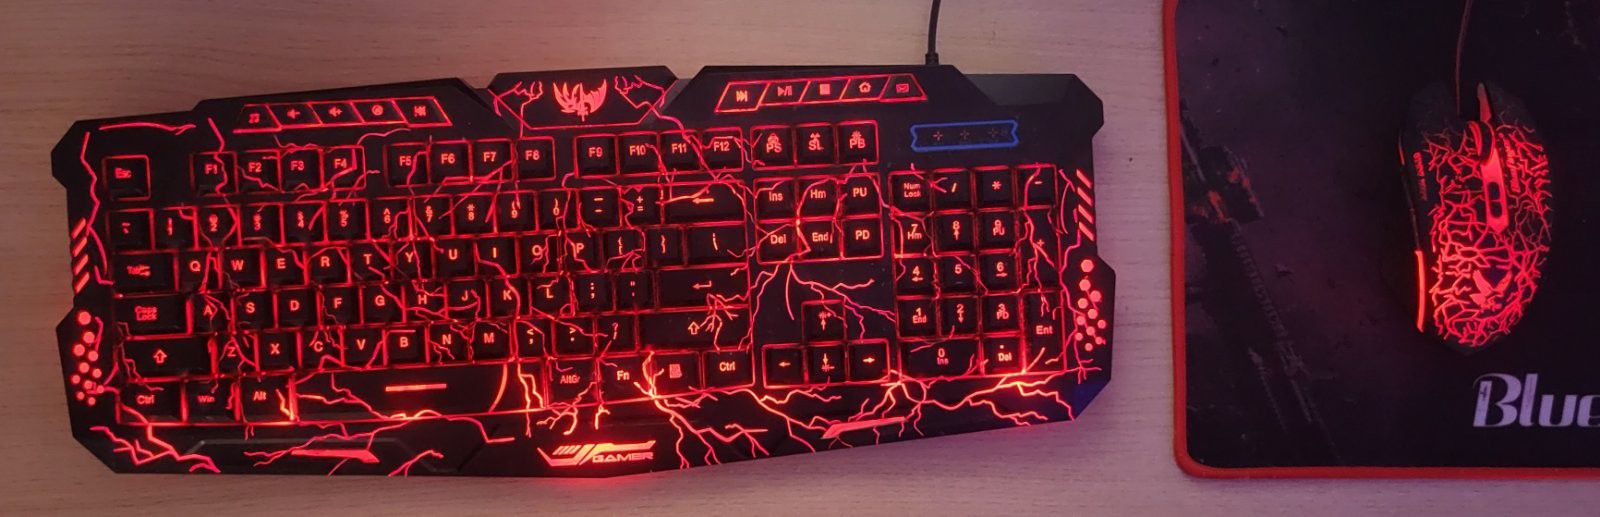 Blue Finger Gaming Mouse, Keyboard And Mouse Pad Combo